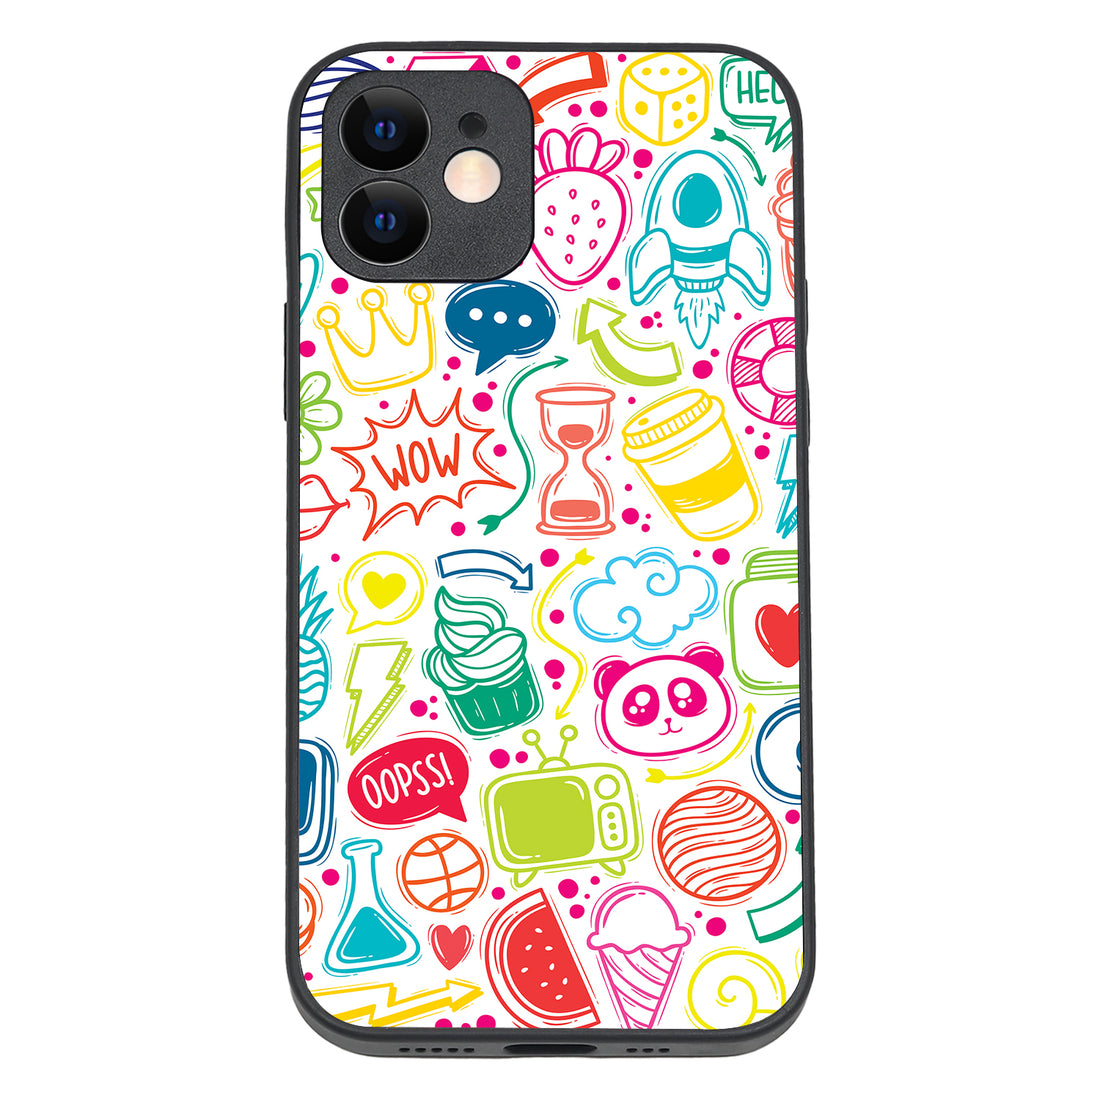 Wow Doodle iPhone 12 Case